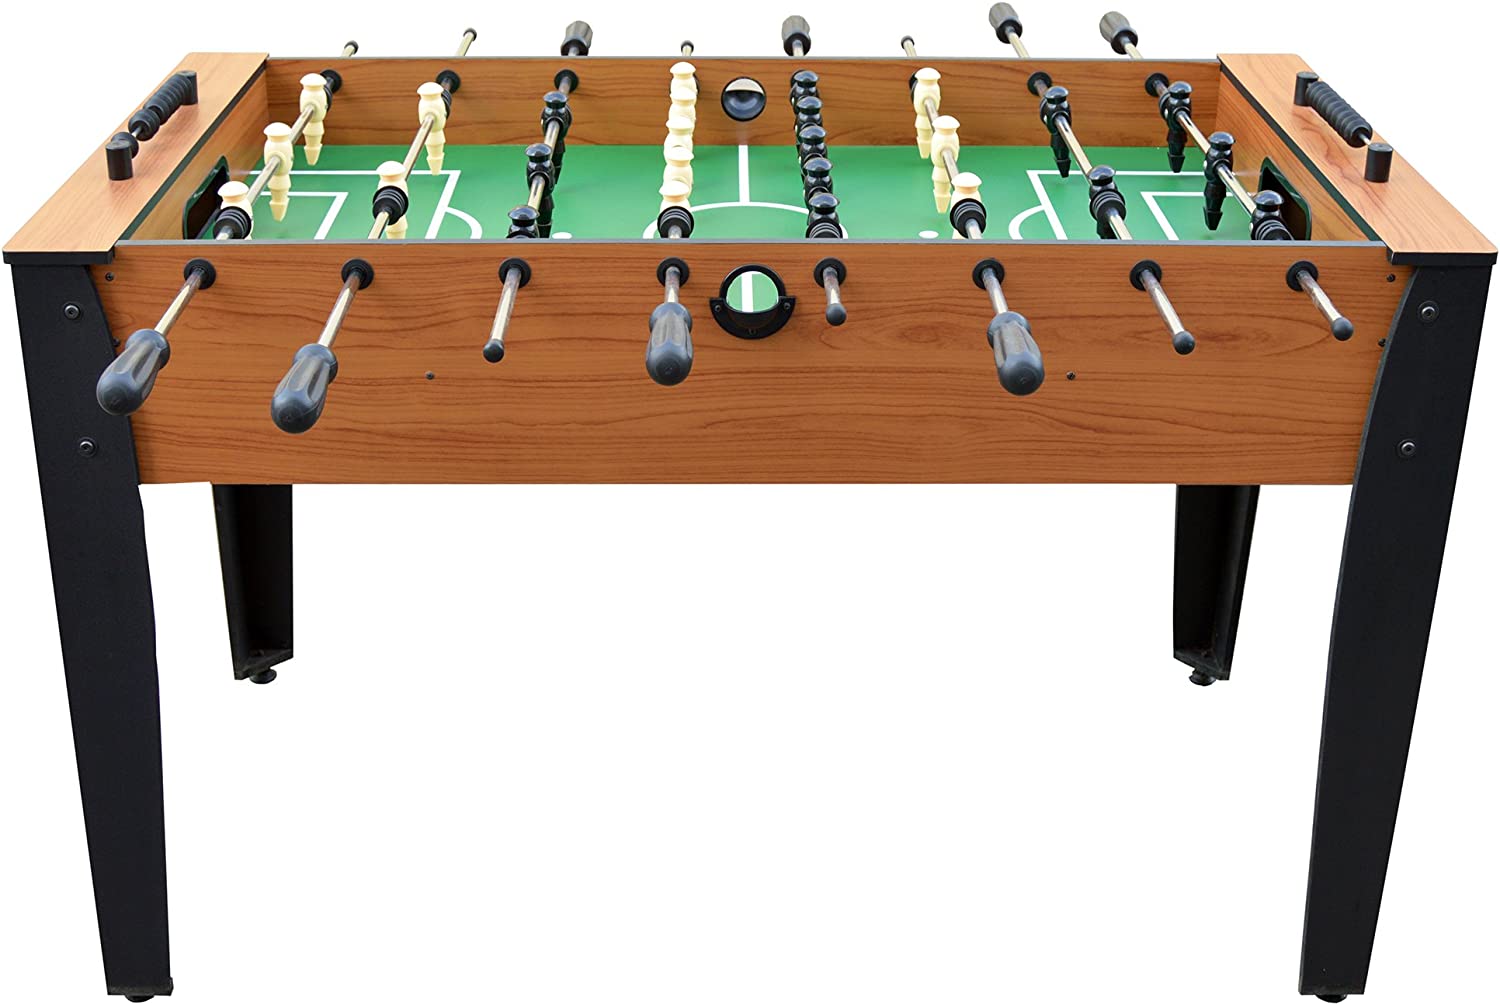 Hathaway 54-Inch Hurricane Foosball Table for Family Game Rooms with Light Cherry Finish, Analog Scoring and Free Accessories